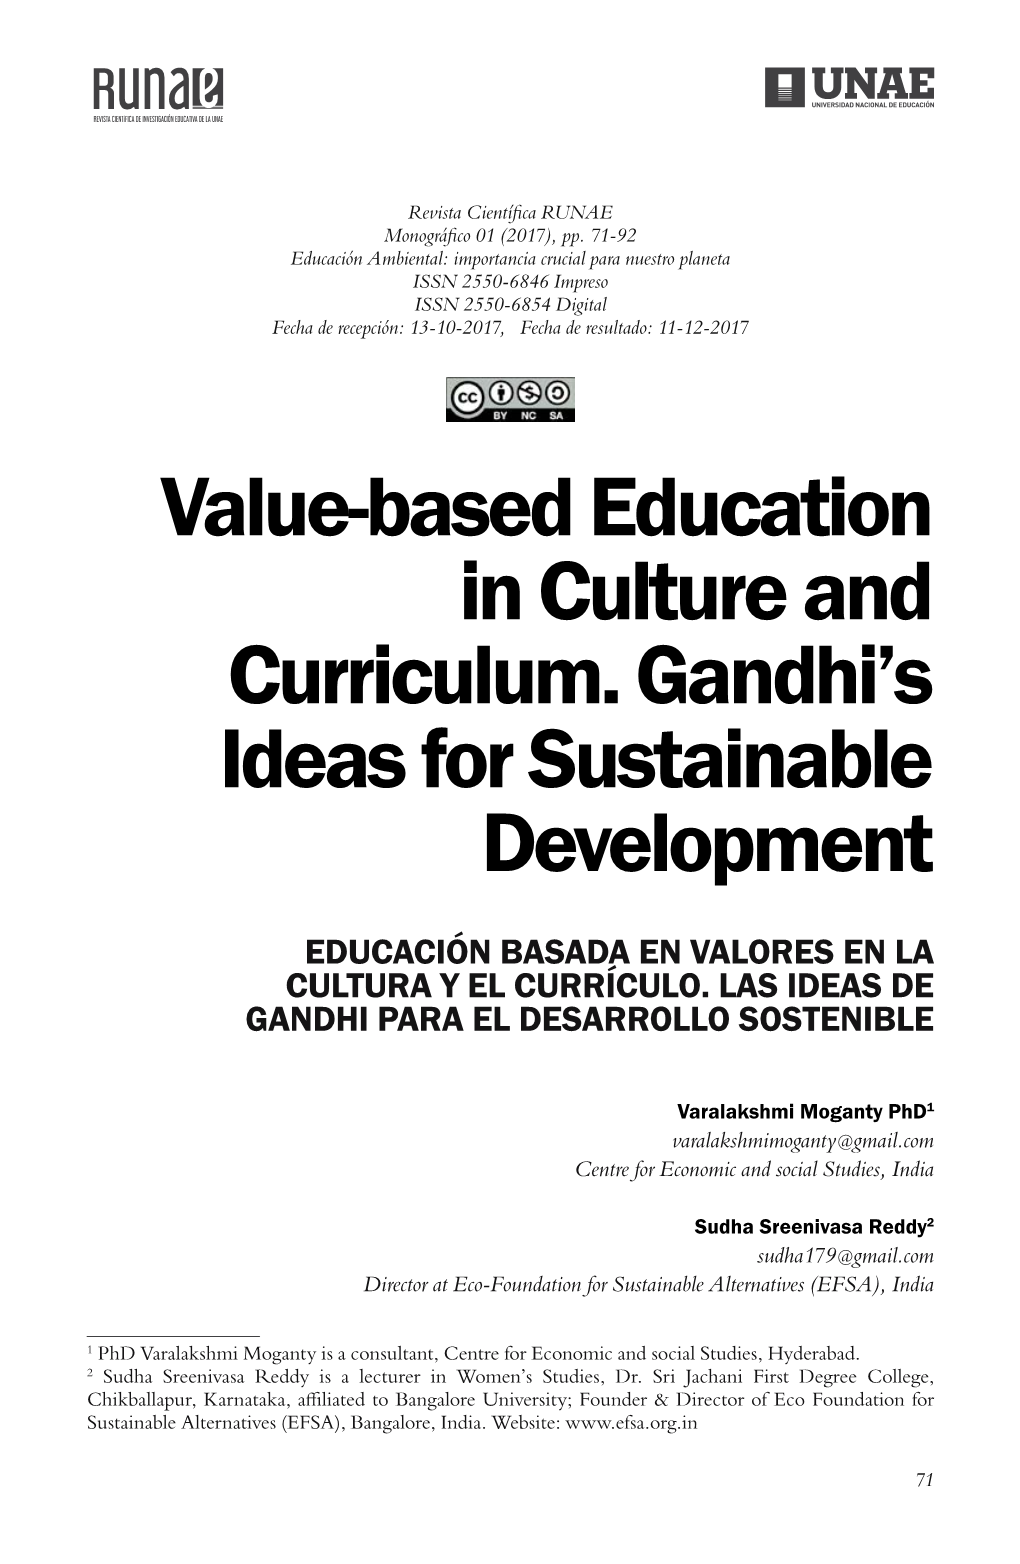 Value-Based Education in Culture and Curriculum. Gandhi's Ideas For